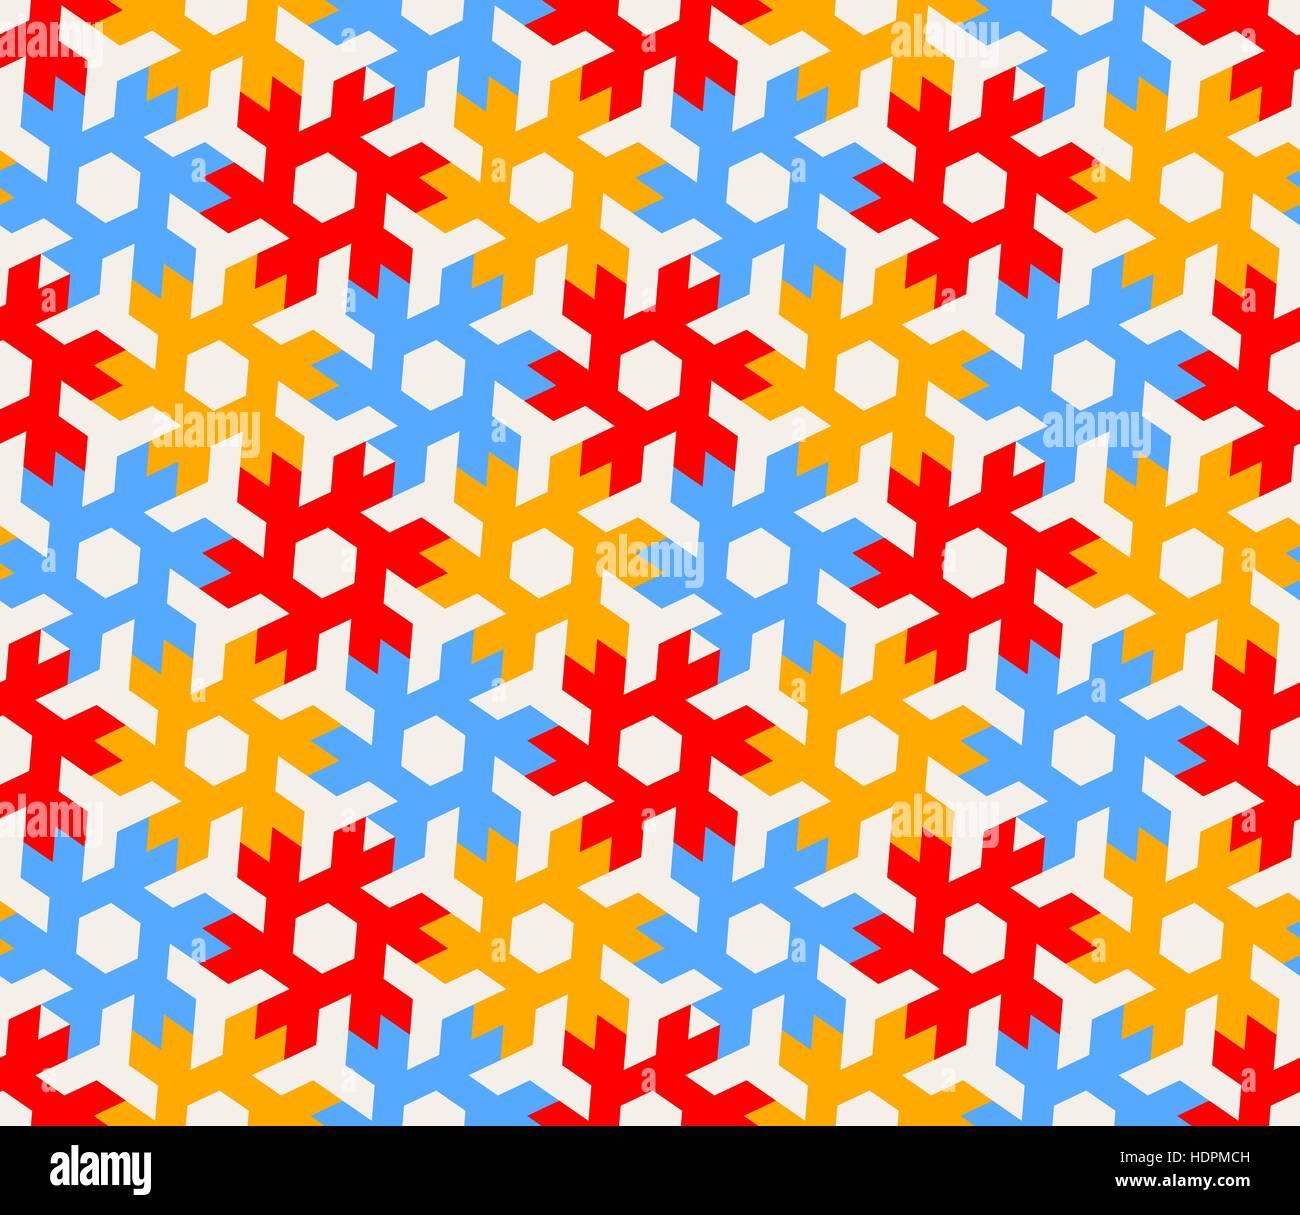 Vector Seamless Geometric Hexagonal Red Blue Yellow Shapes Tiling  on White Background Pattern Stock Vector